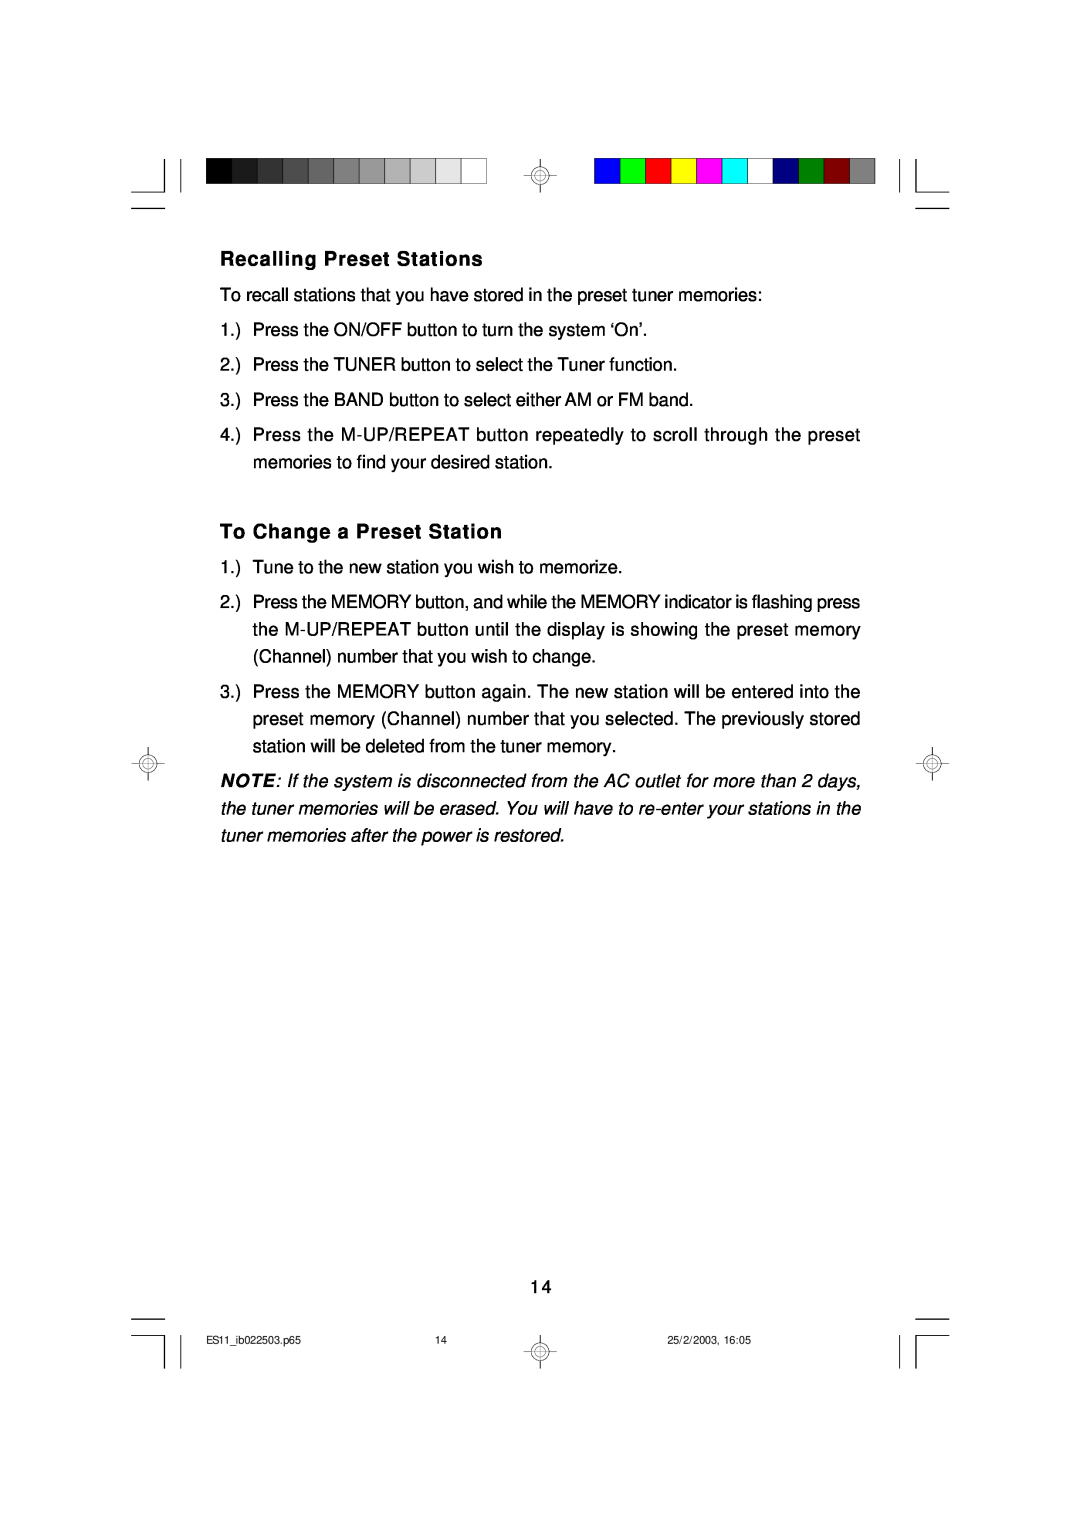 Emerson ES11 owner manual Recalling Preset Stations, To Change a Preset Station 